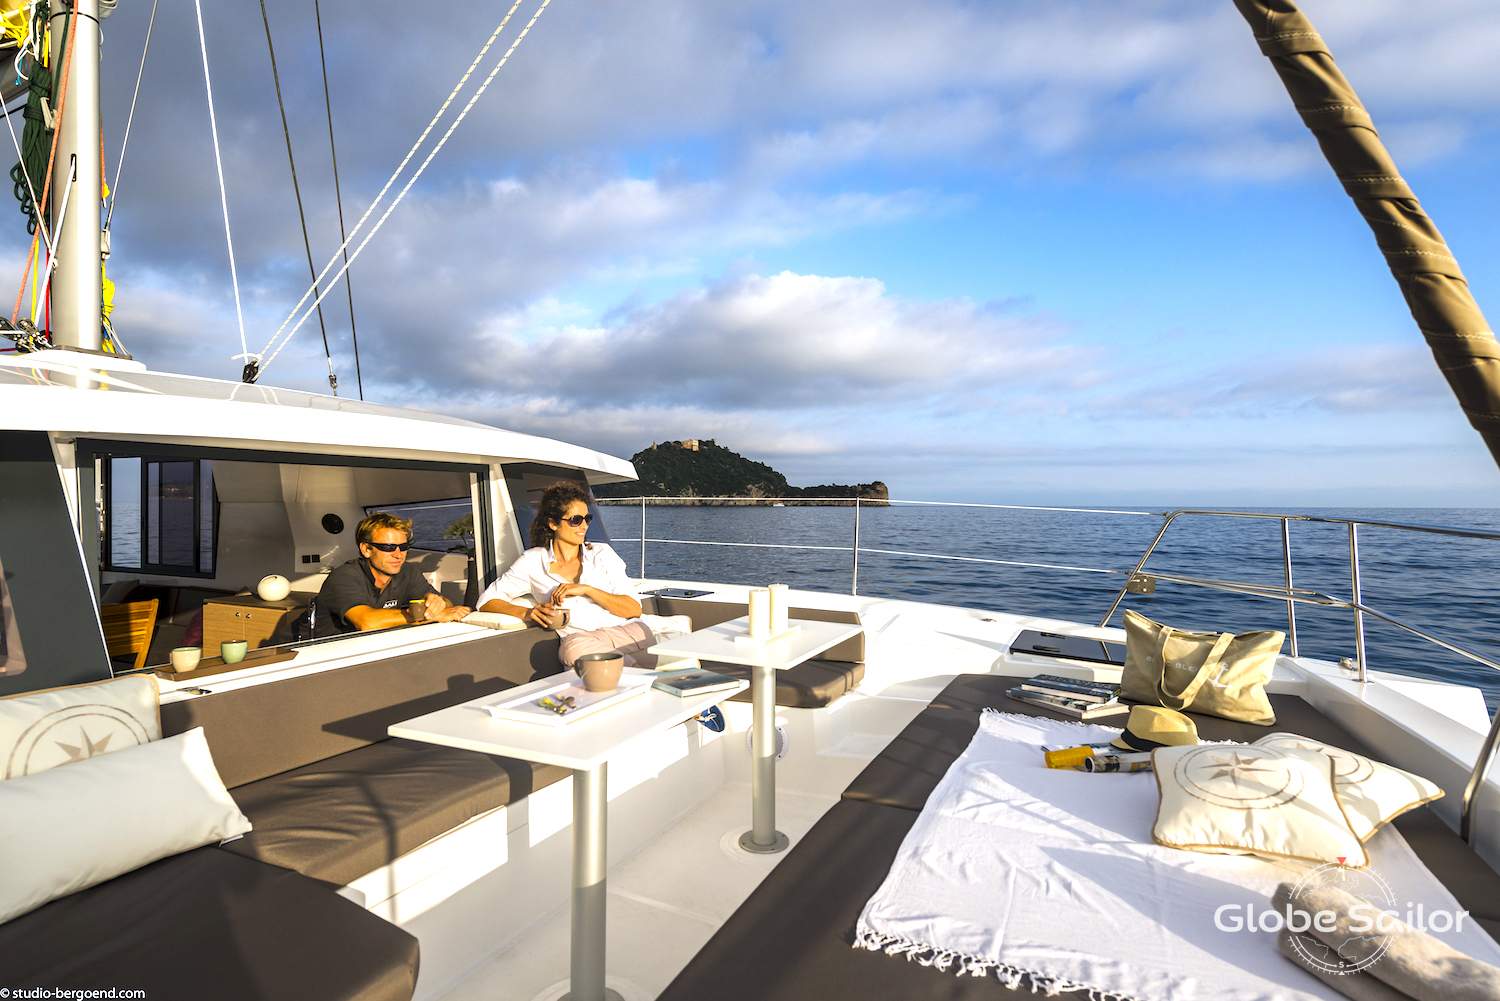 Relax at the front of the catamaran and catch the sunset